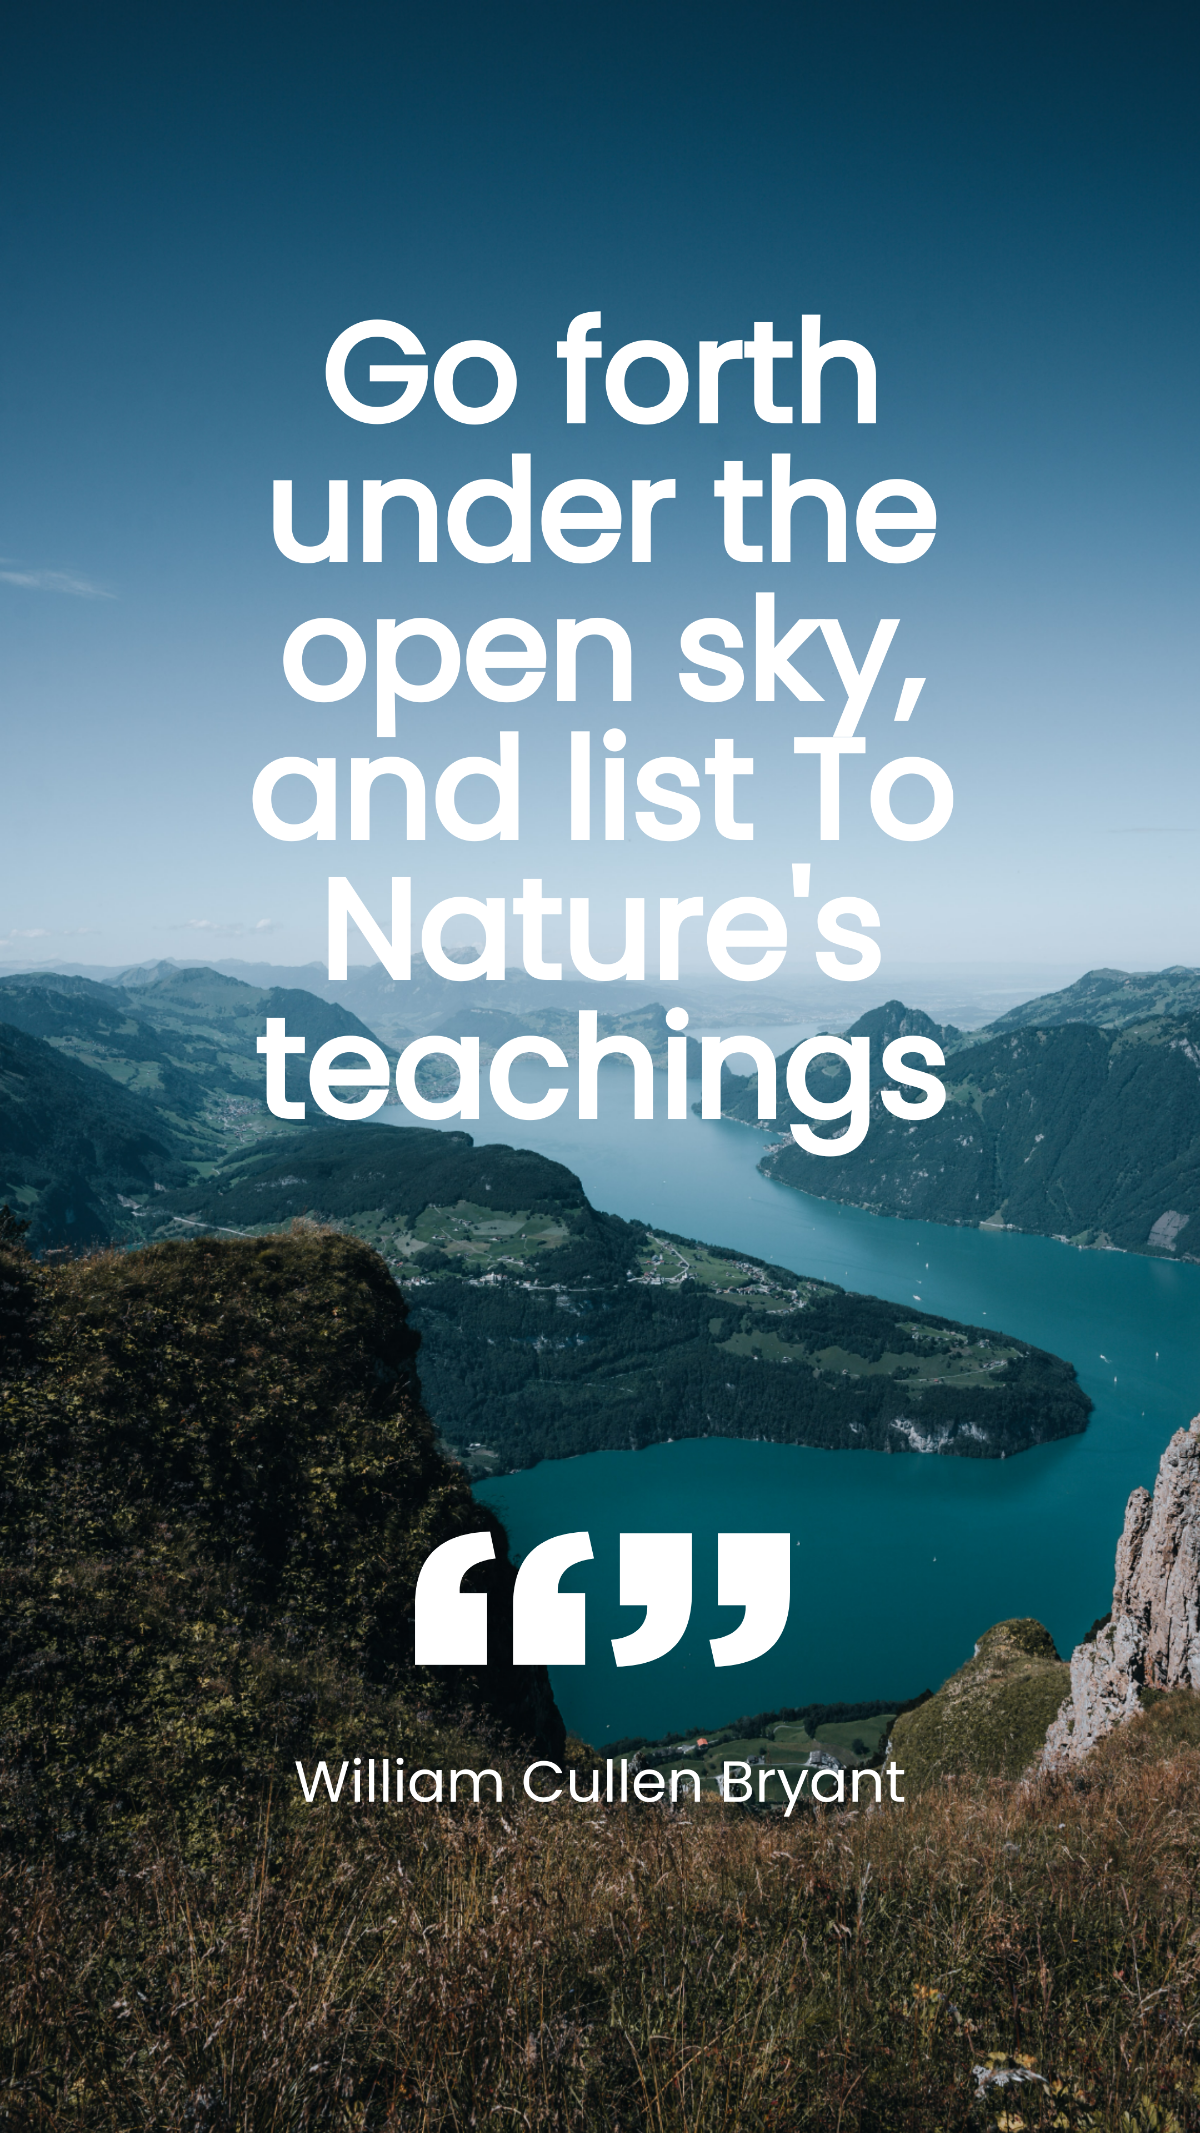 Free William Cullen Bryant - Go forth under the open sky, and list To Nature's teachings. Template